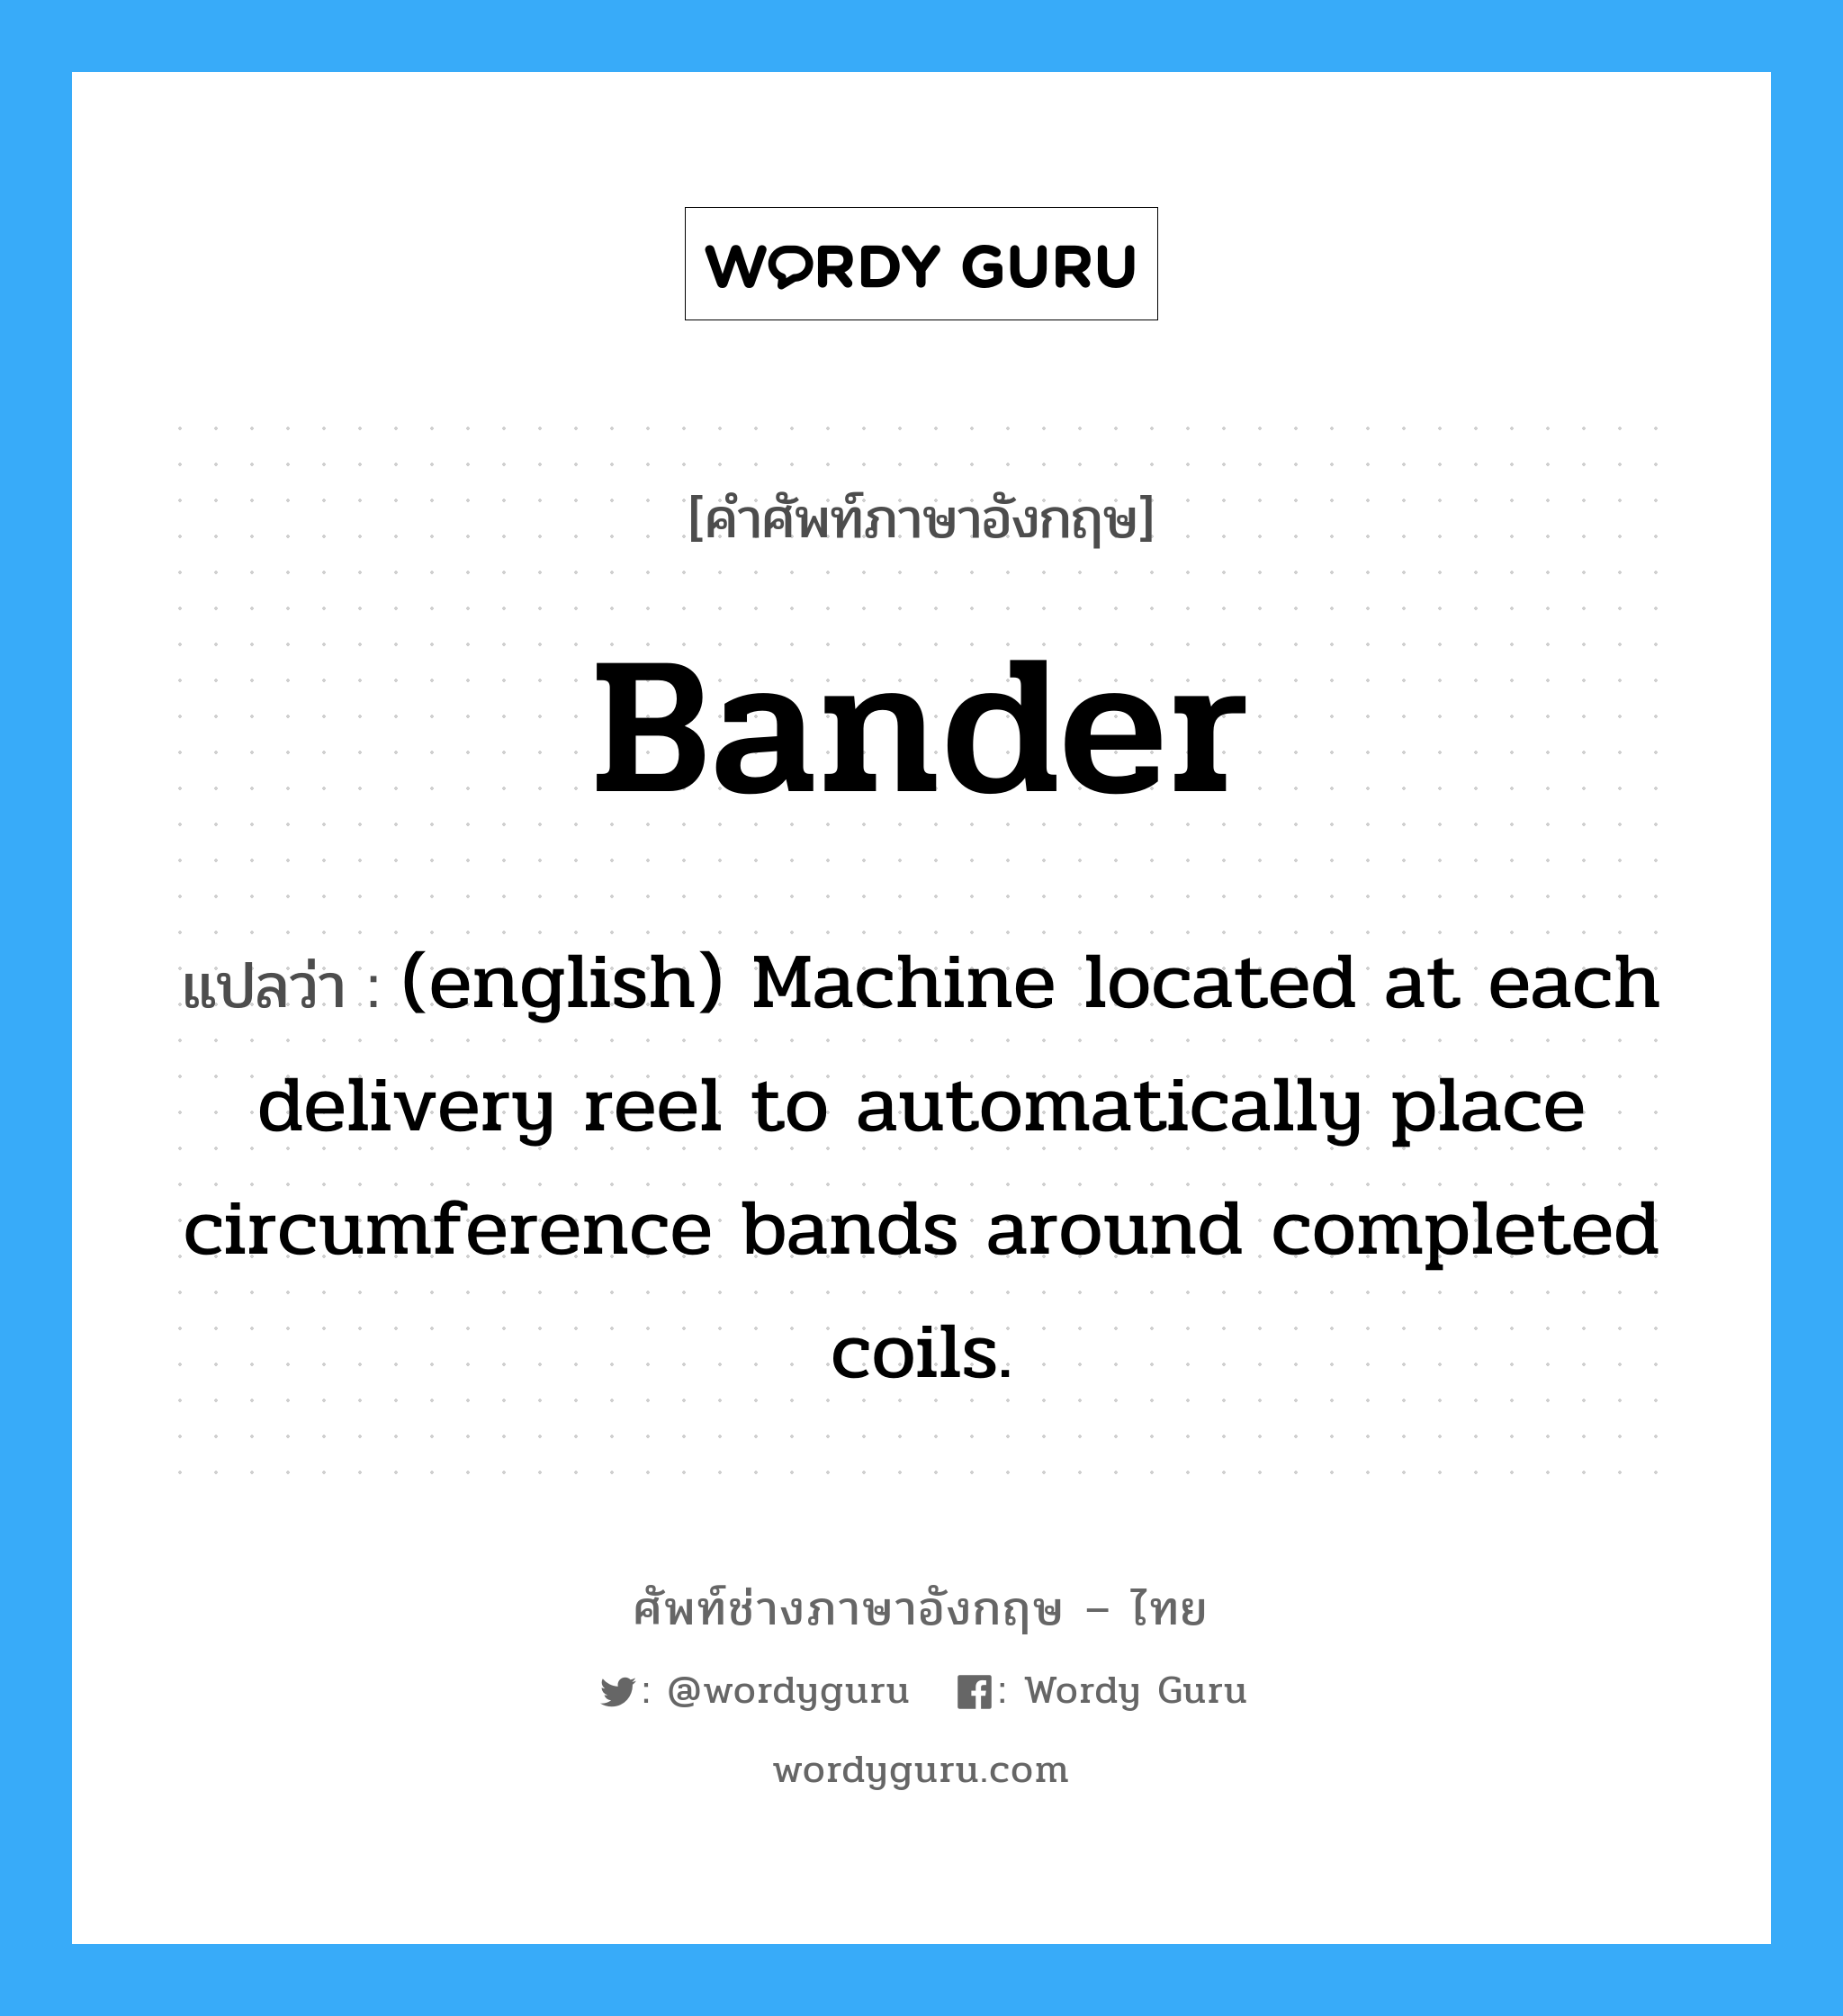 Bander แปลว่า?, คำศัพท์ช่างภาษาอังกฤษ - ไทย Bander คำศัพท์ภาษาอังกฤษ Bander แปลว่า (english) Machine located at each delivery reel to automatically place circumference bands around completed coils.